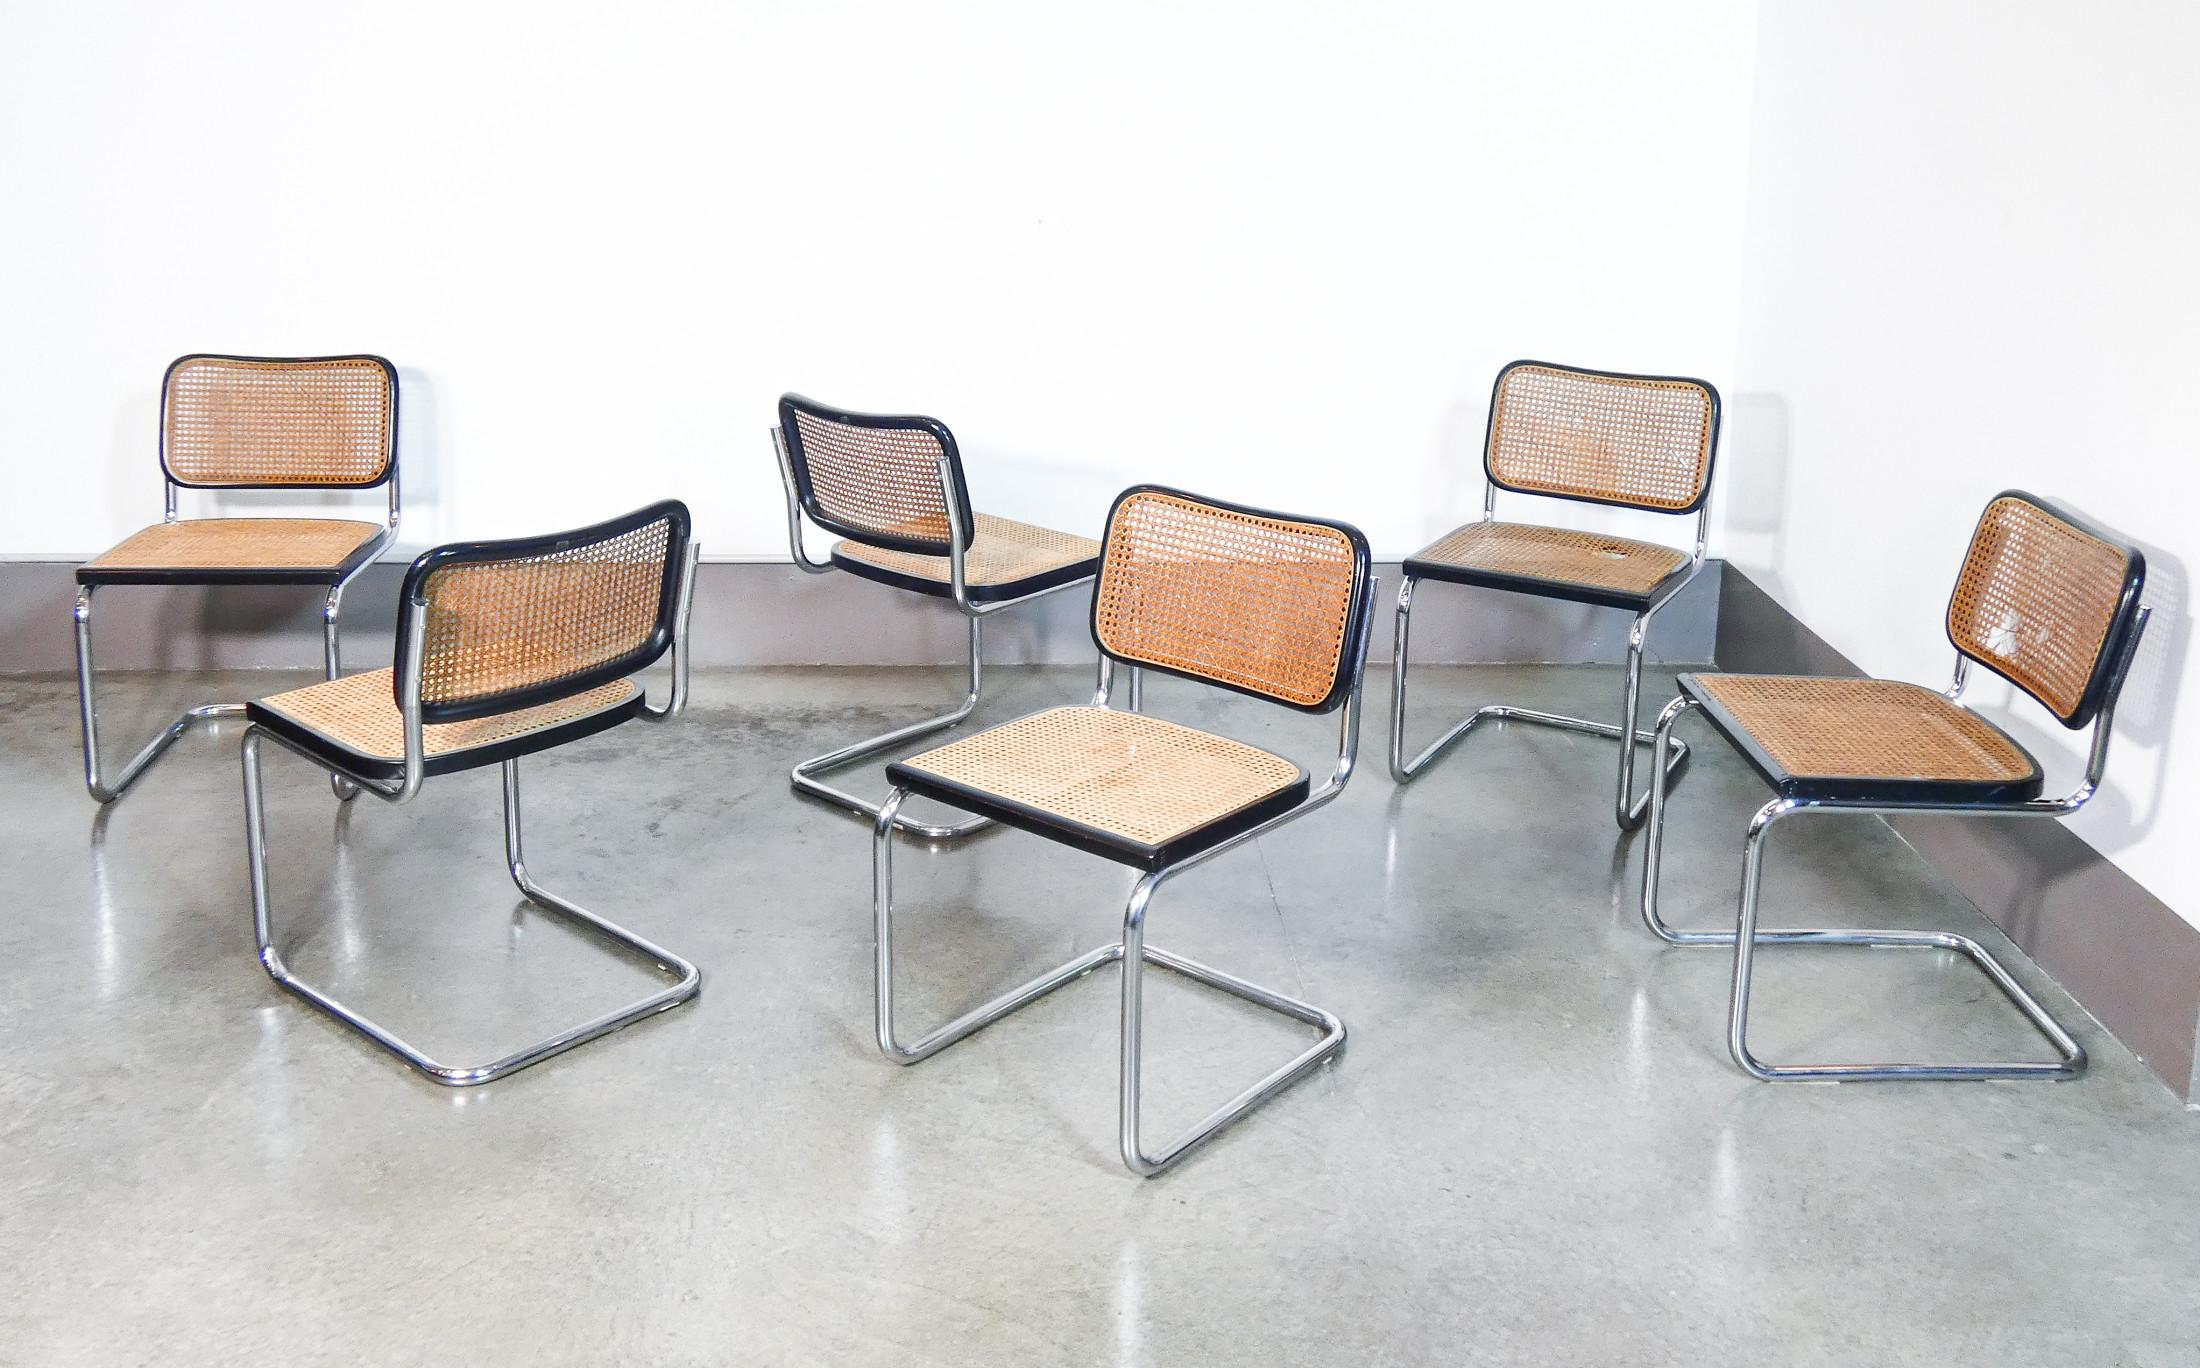 Set of six chairs
CESCA B32
design Marcel BREUER.
Gavina production.

ORIGIN
Italy

PERIOD
1950s

DESIGNER
Marcel BREUER

MARK
Gavina Production
labels on the bottom

MODEL
CESCA B32
In 1928 Marcel Breuer designed the B 32 chair, which was later